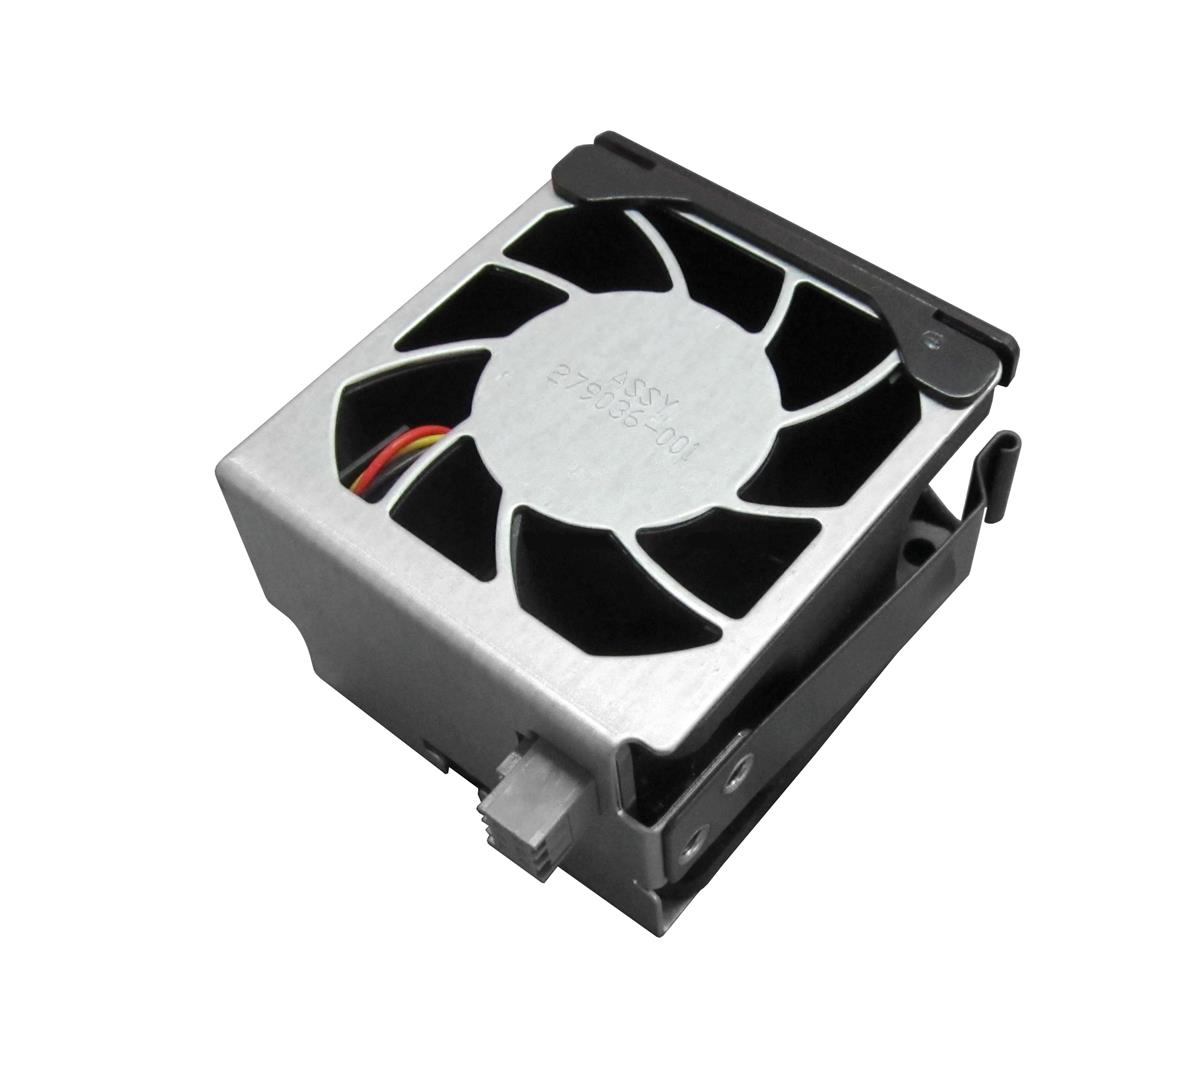 279036-001 HP 60mm X 38mm Redundent Hot Pluggable Fan for ProLiant DL380 G3 Server